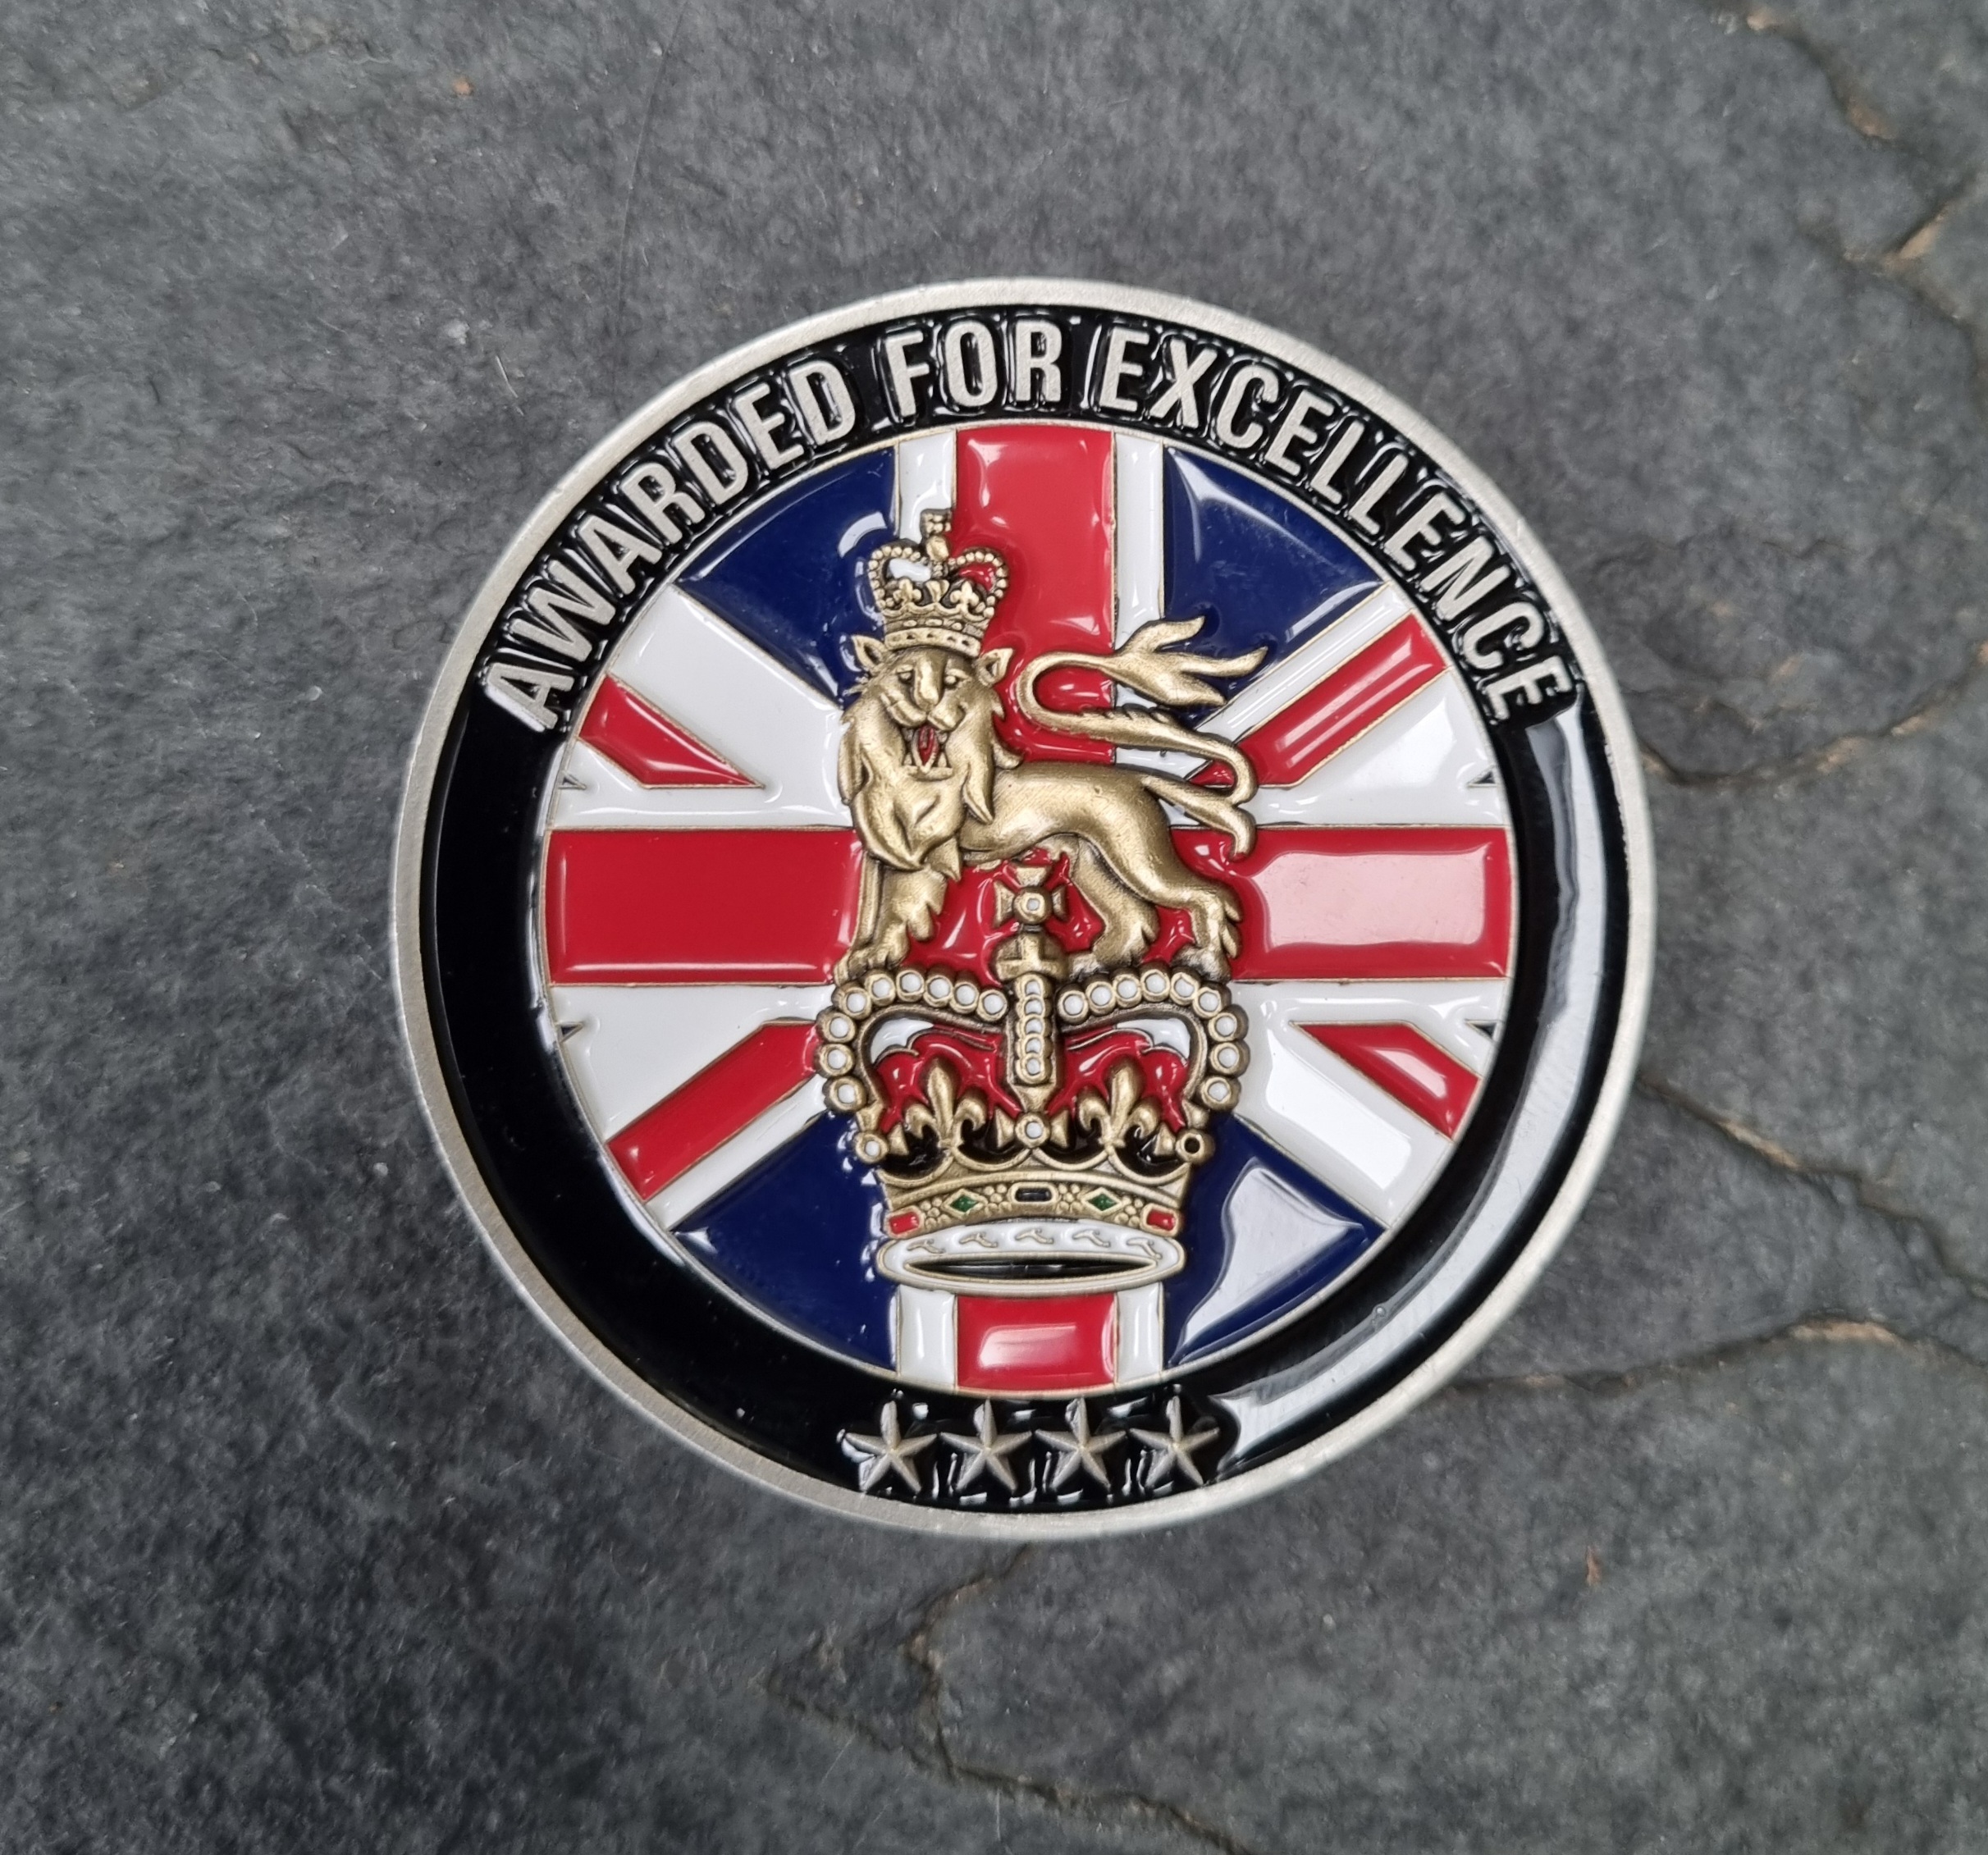 A coin with text 'awarded for excellent' on the edge and union jack flag with military crest.